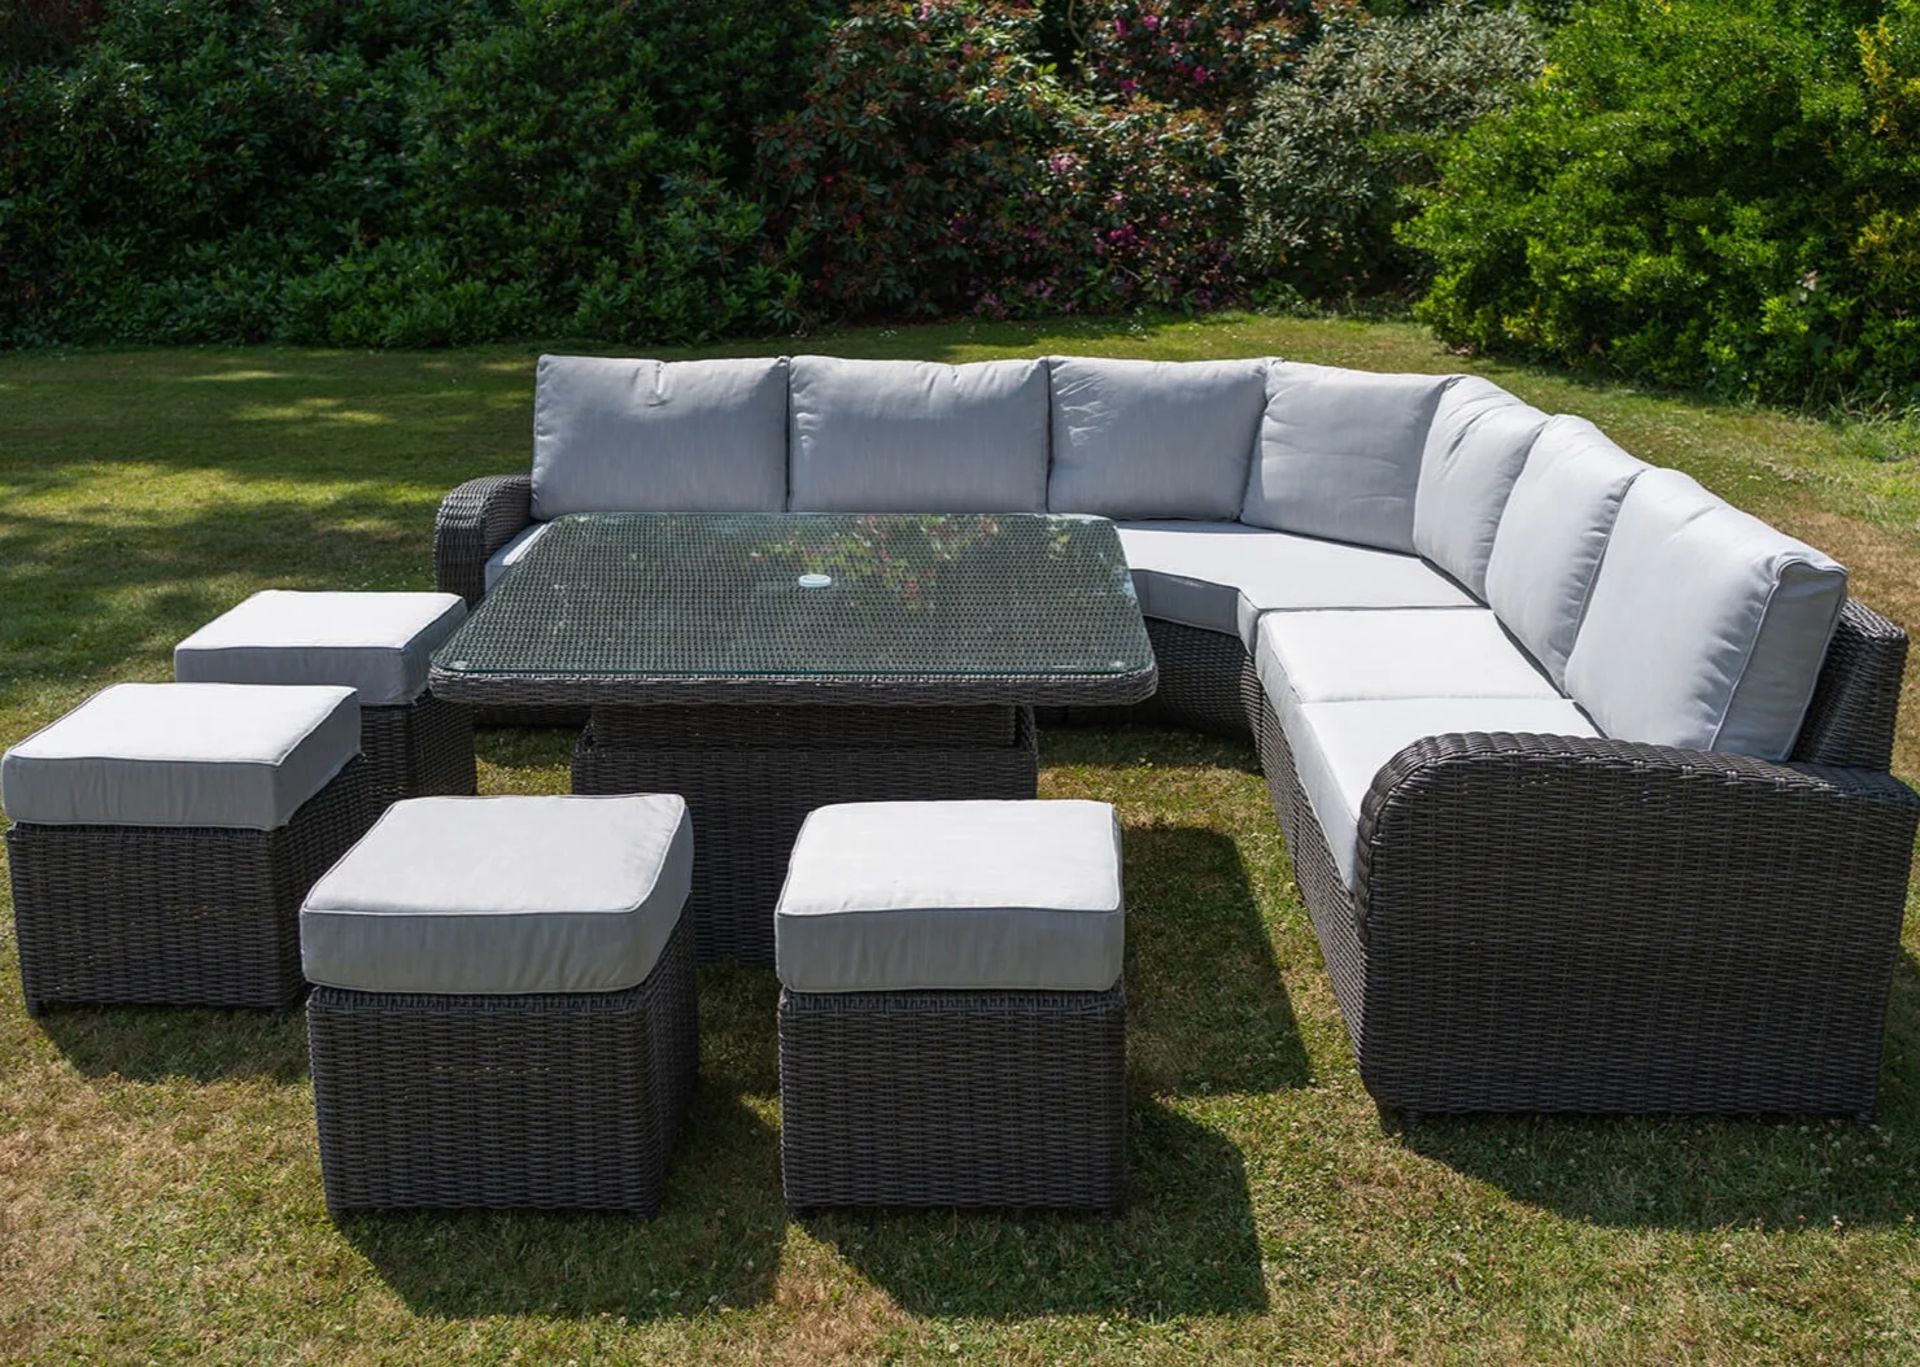 Brand New Moda Furniture, 10 Seater Outdoor Rise and Fall Table Dining Set in Natural with Cream - Image 3 of 8